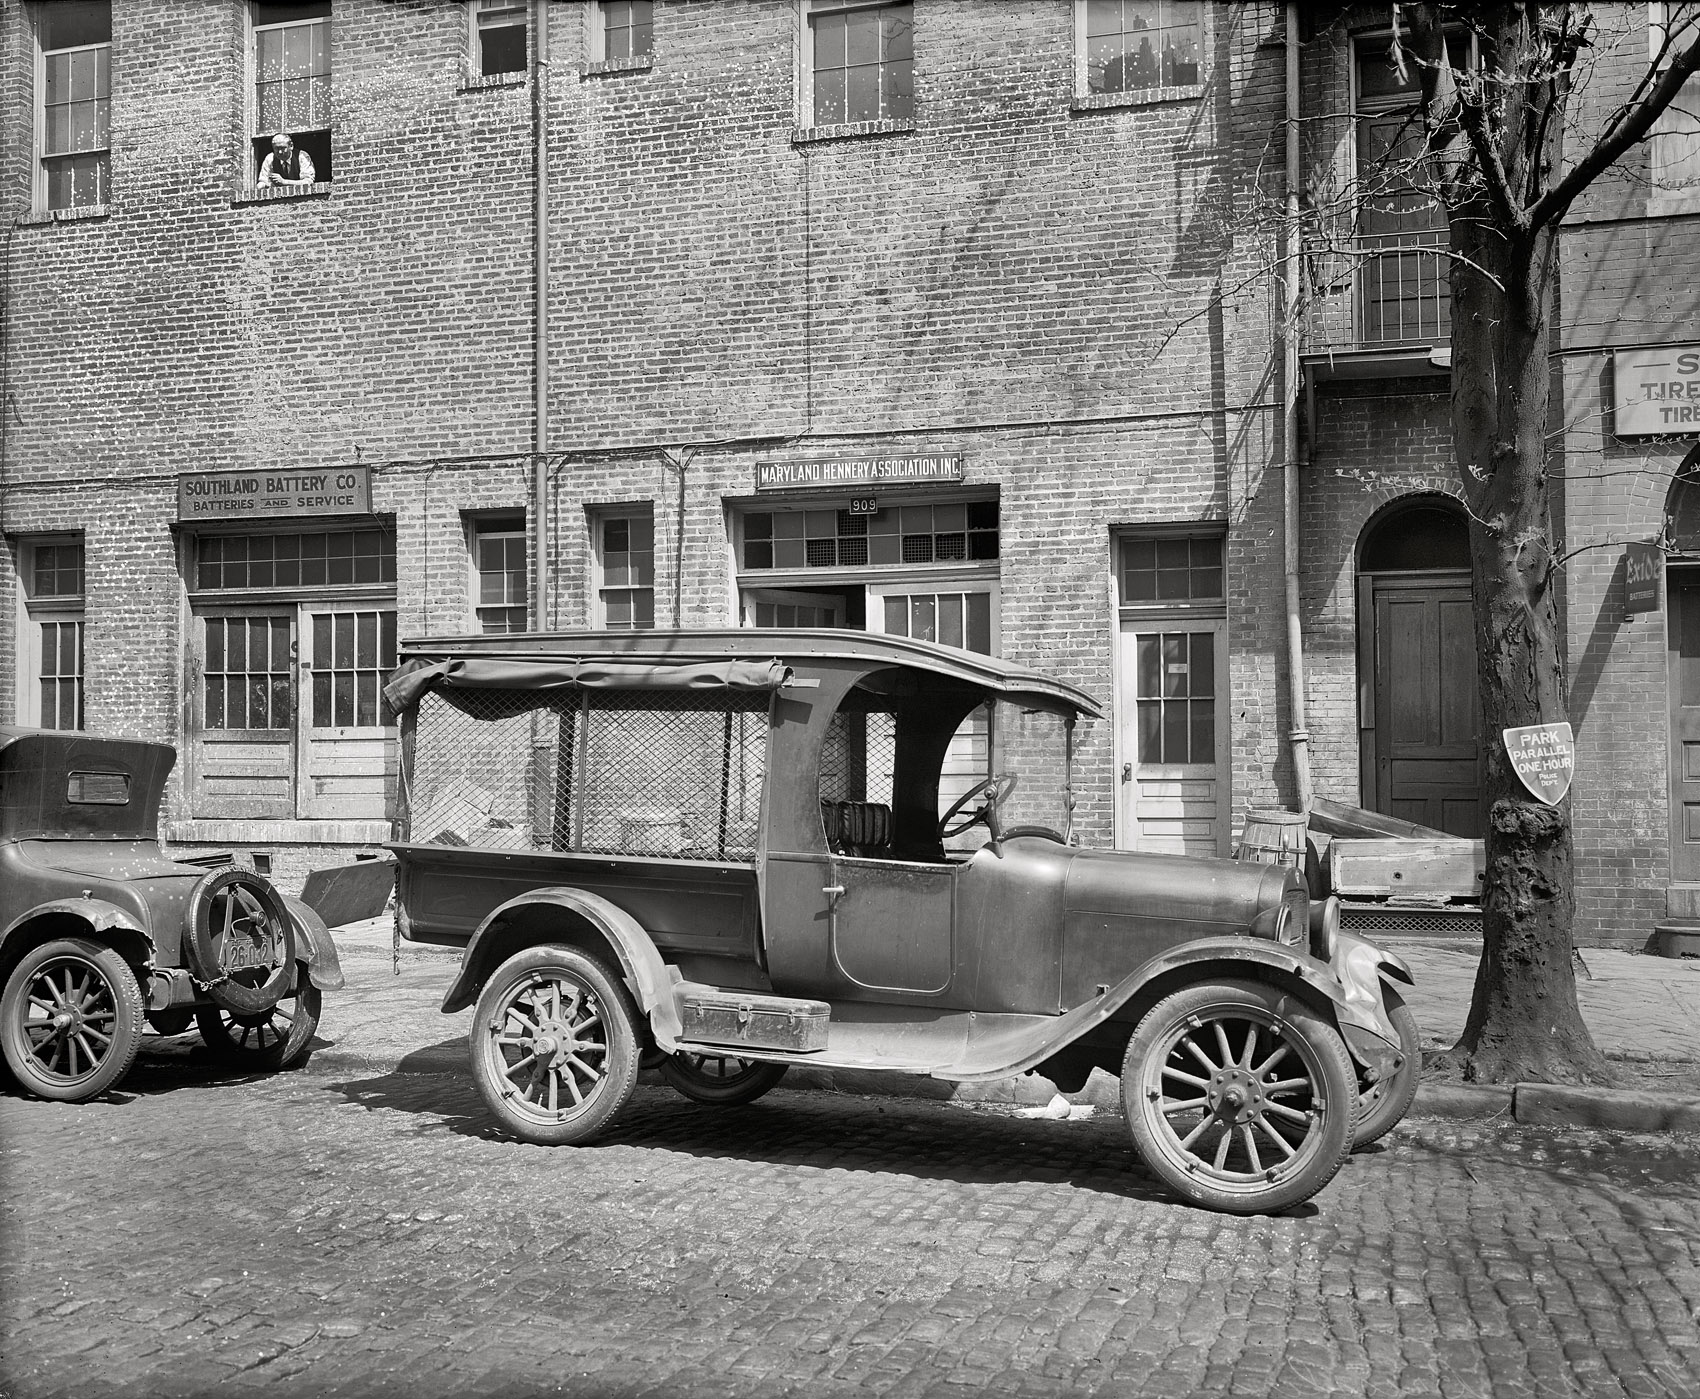 Washington circa 1926. "Semmes Motor Co., Maryland Hennery Association truck." A hennery being a place where hens are raised. My Shorpy GPS (Guessing Possible Street) says this might be the back of a building that faced Pennsylvania Avenue. National Photo Company Collection glass negative. View full size.